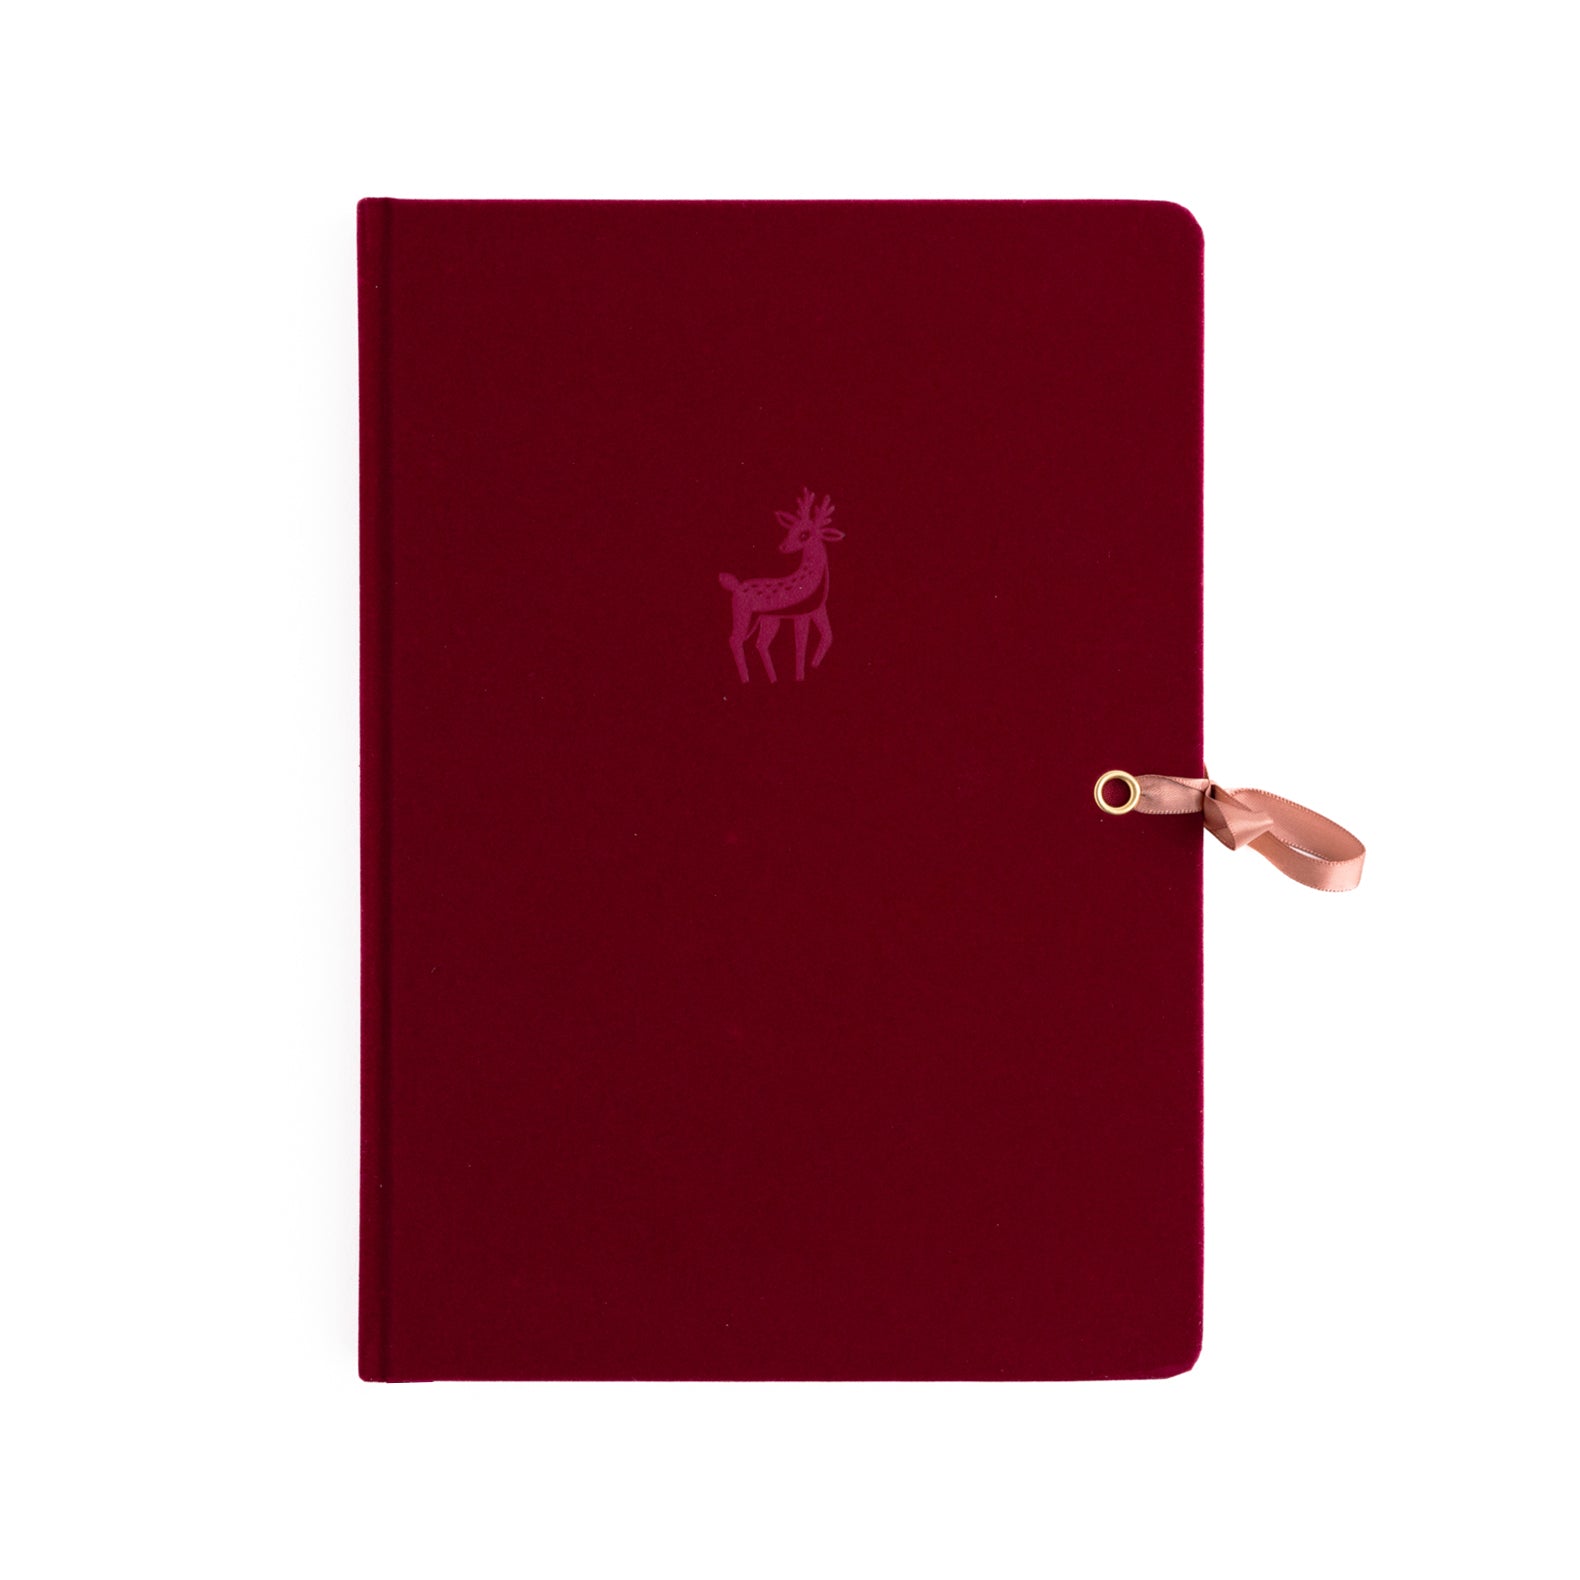 Archer and Olive Notebooks: 7 reasons why I LOVE them!